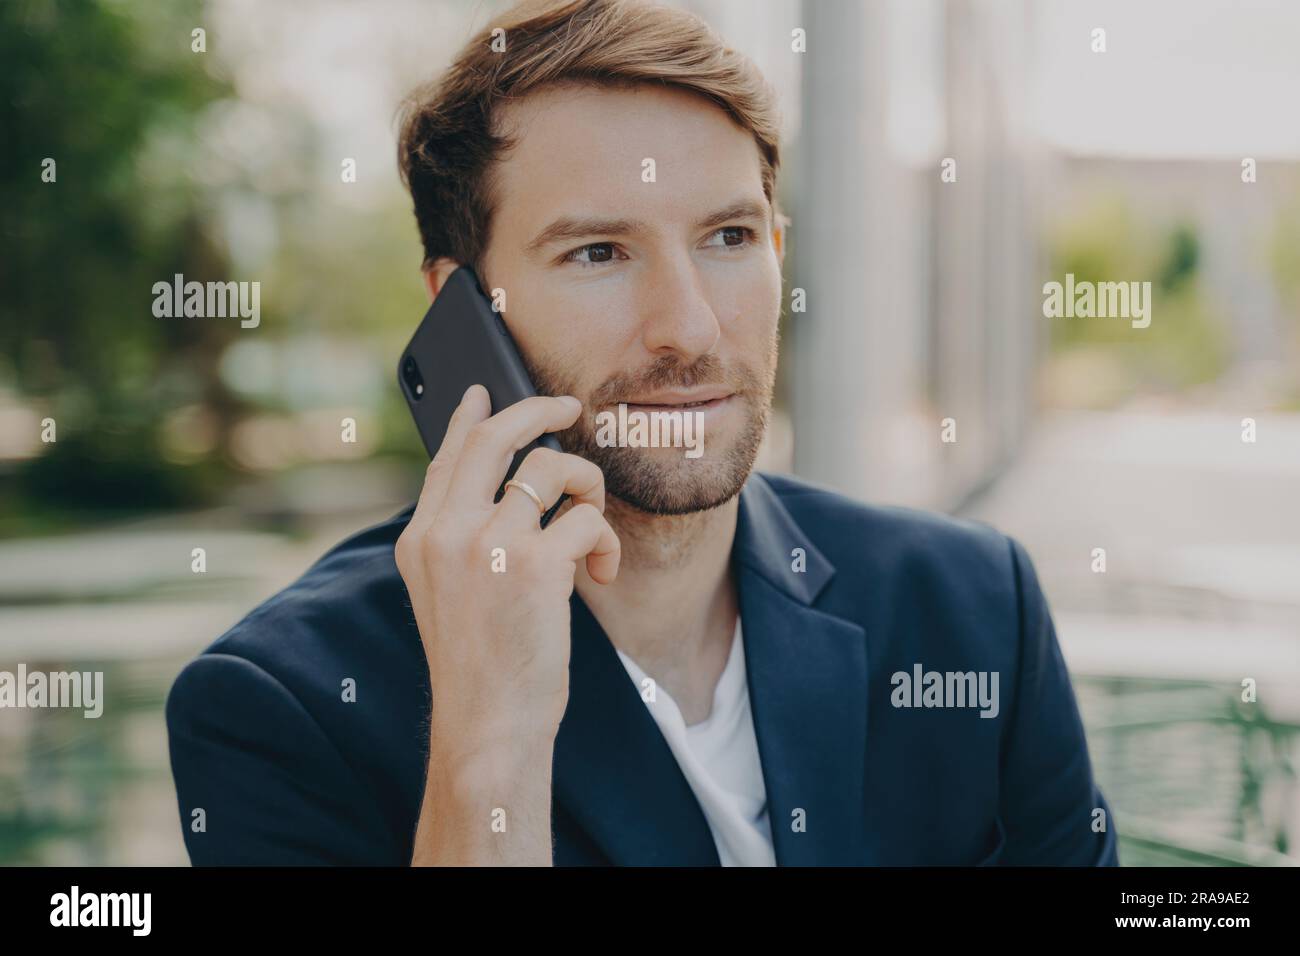 Confident male entrepreneur or manager, in formal attire, consults client, discussing future project, through phone call, outdoors, busy day. Stock Photo